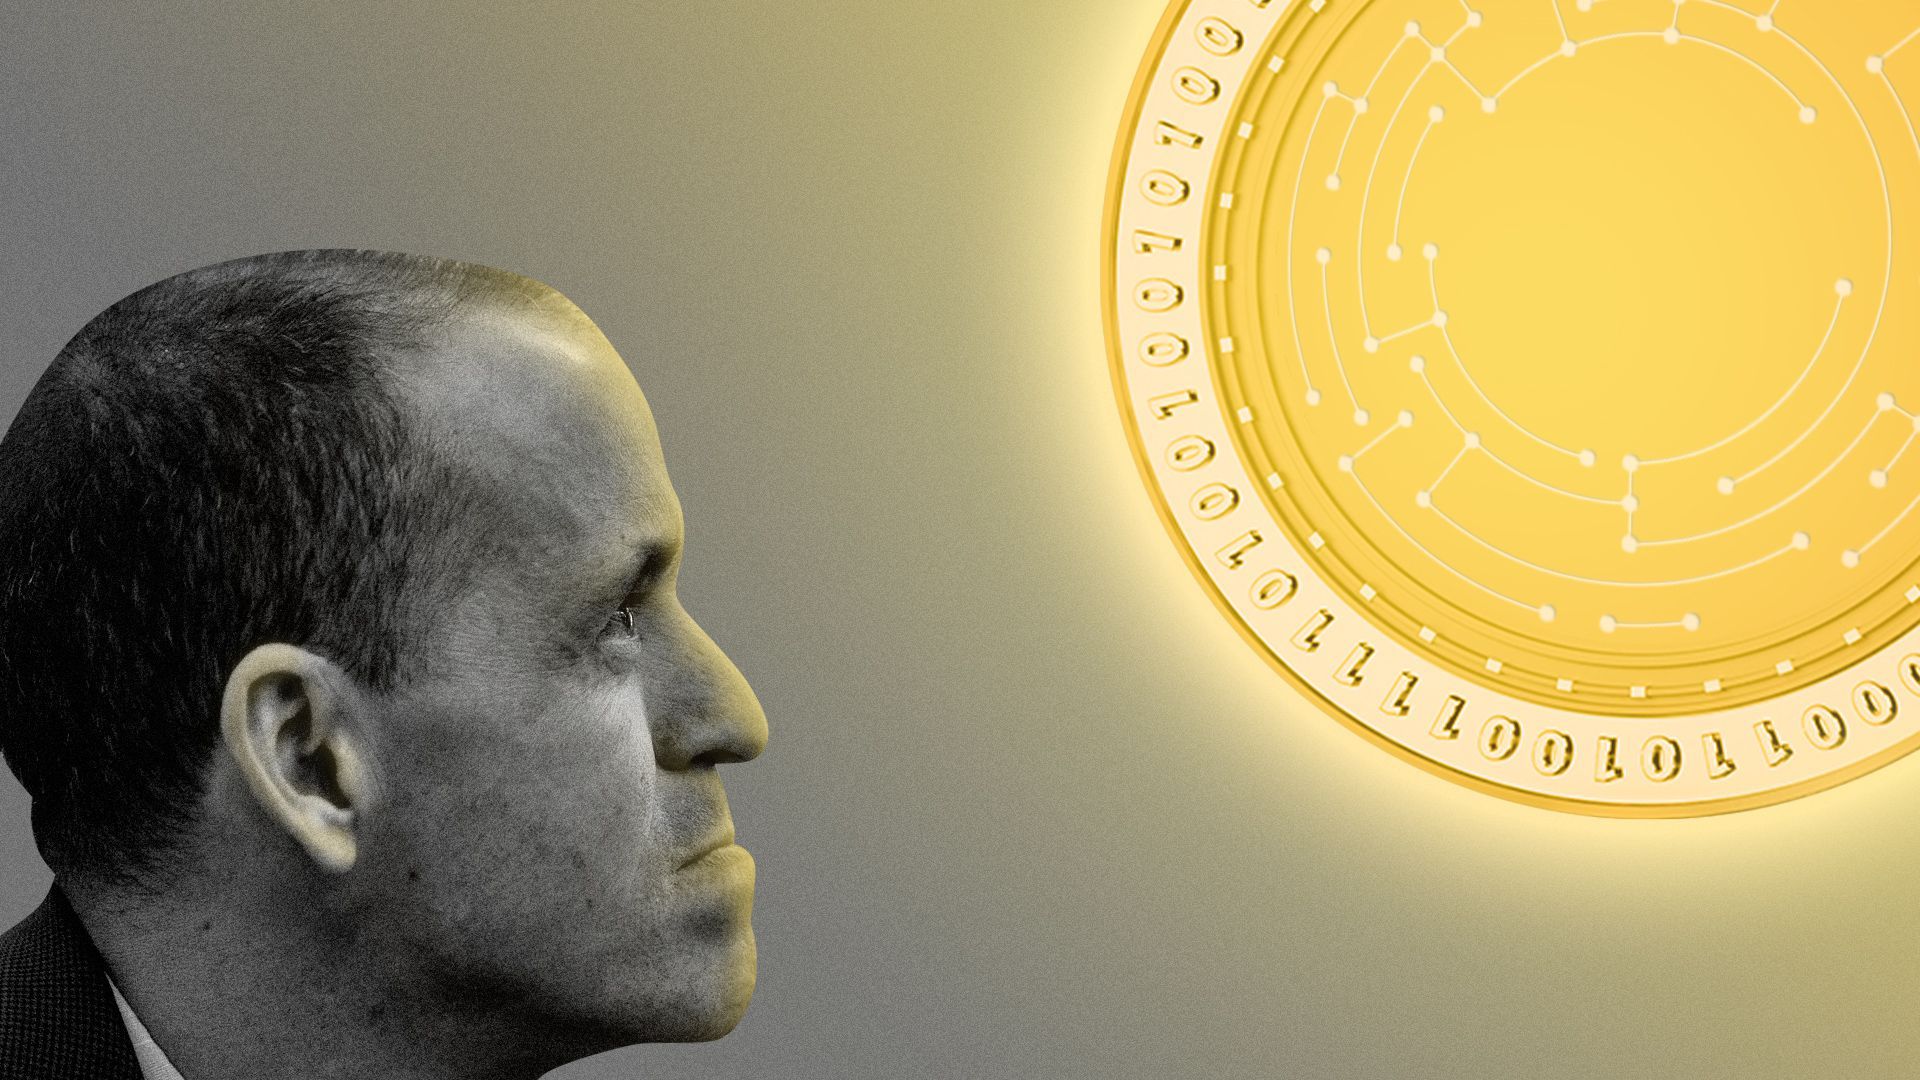 Photo illustration of Chris Lehane looking up at a glowing crypto coin.